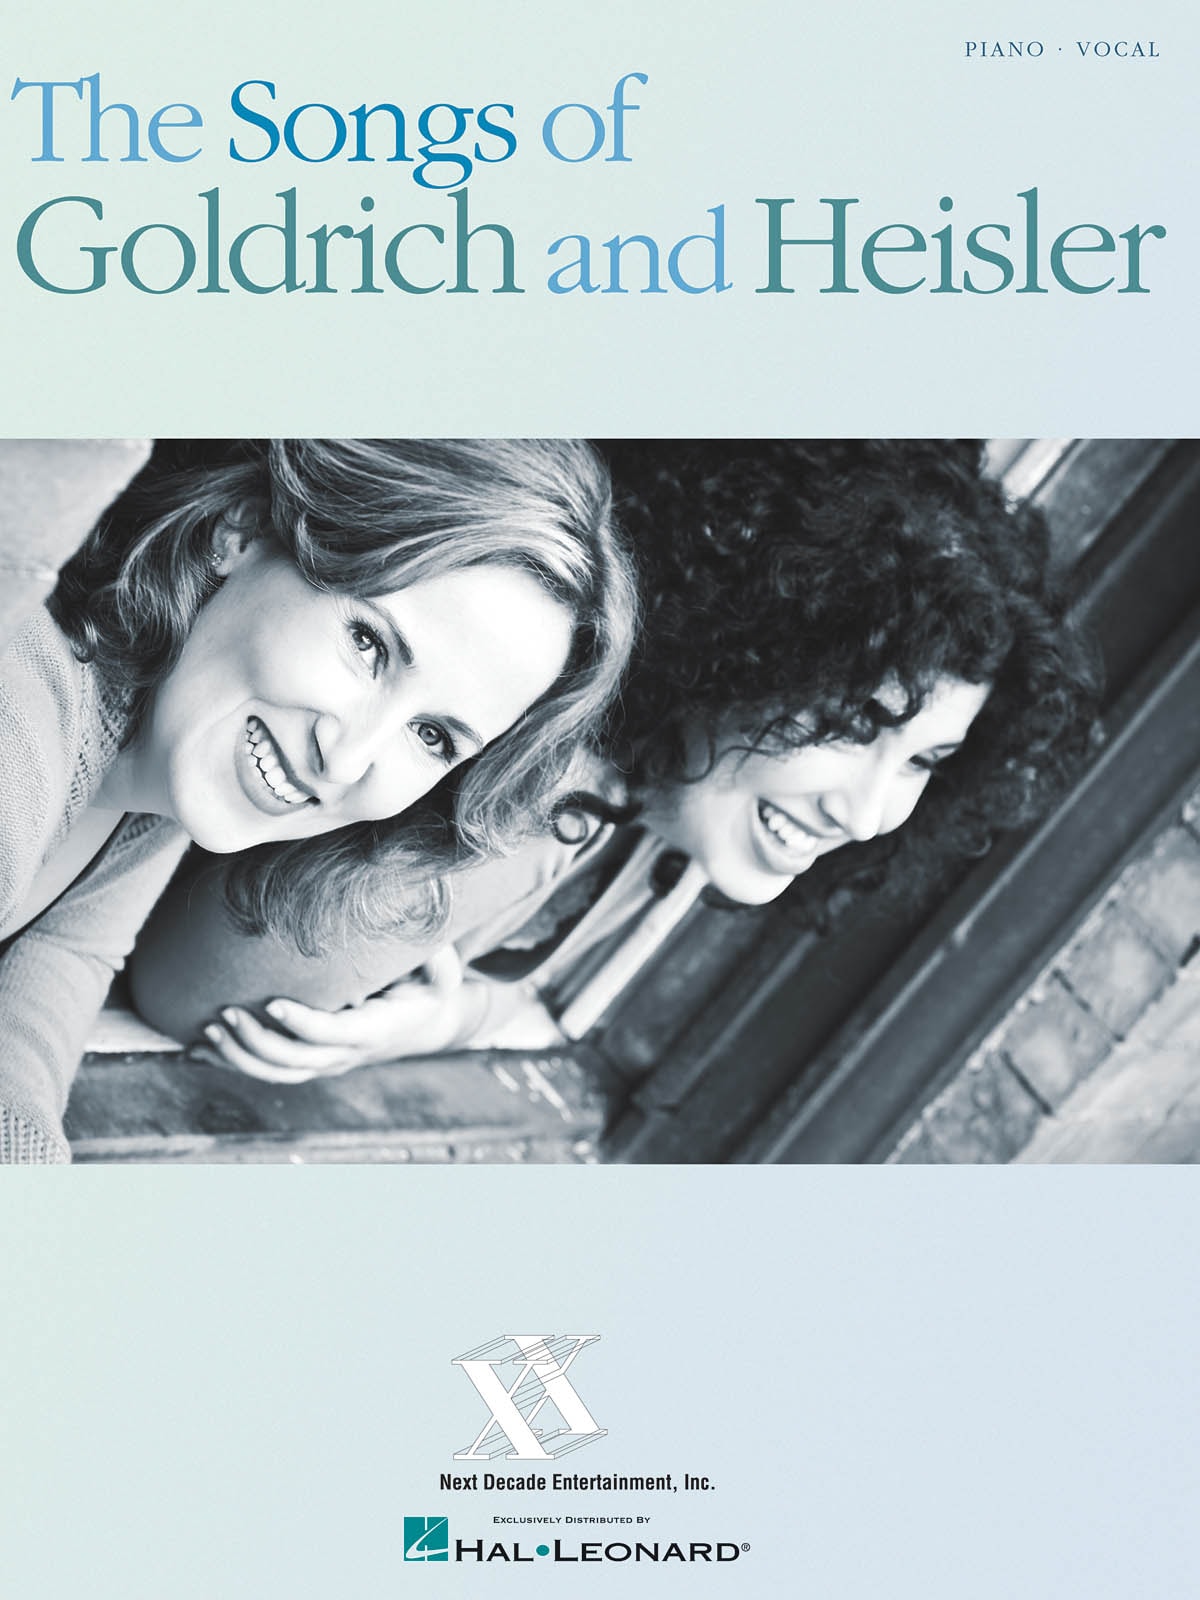 The Songs of Goldrich and Heisler published by Hal Leonard